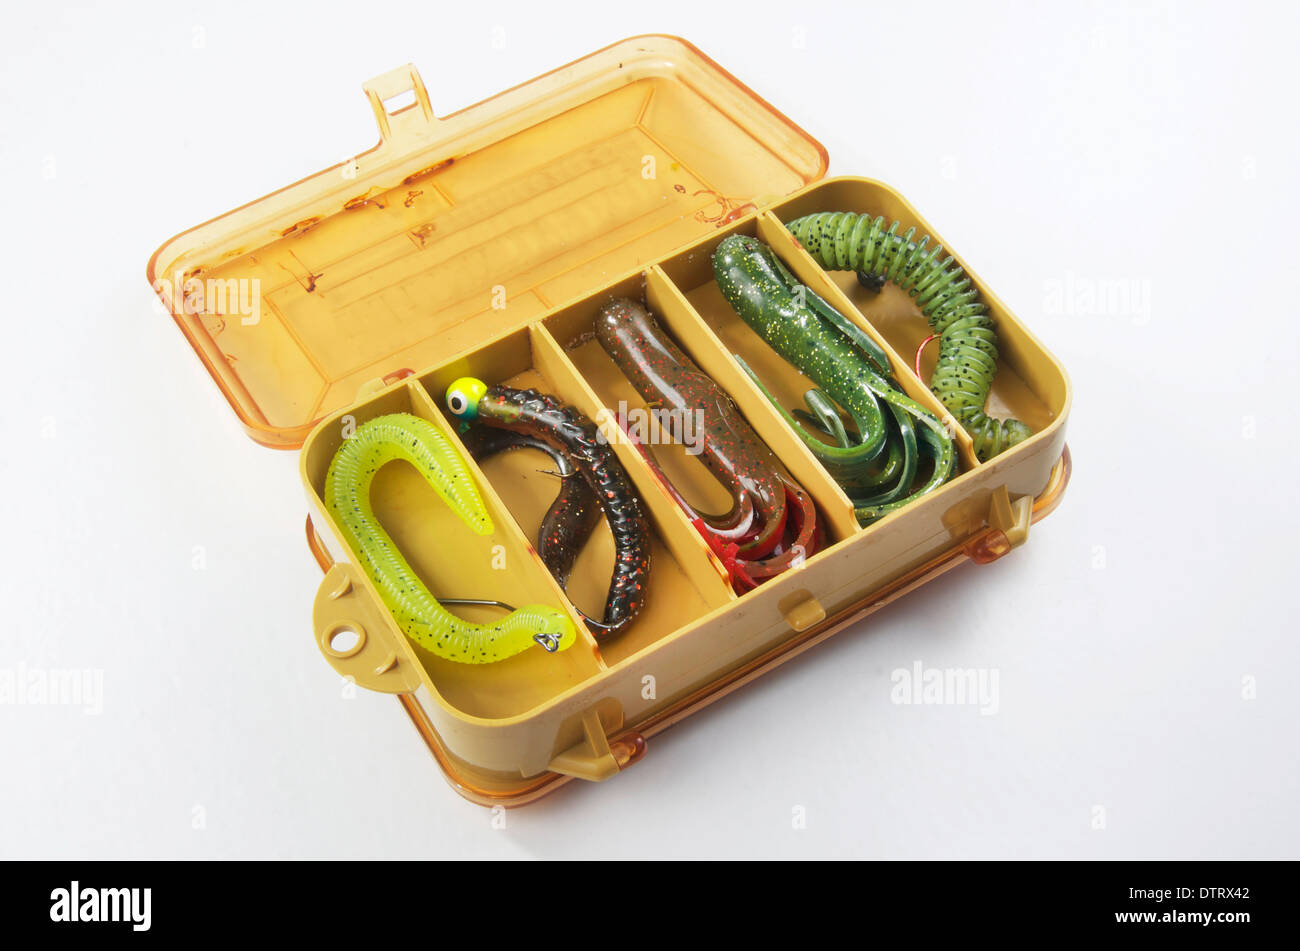 https://c8.alamy.com/comp/DTRX42/bass-bait-or-old-fishing-tackle-box-with-rubber-worms-and-tubes-DTRX42.jpg